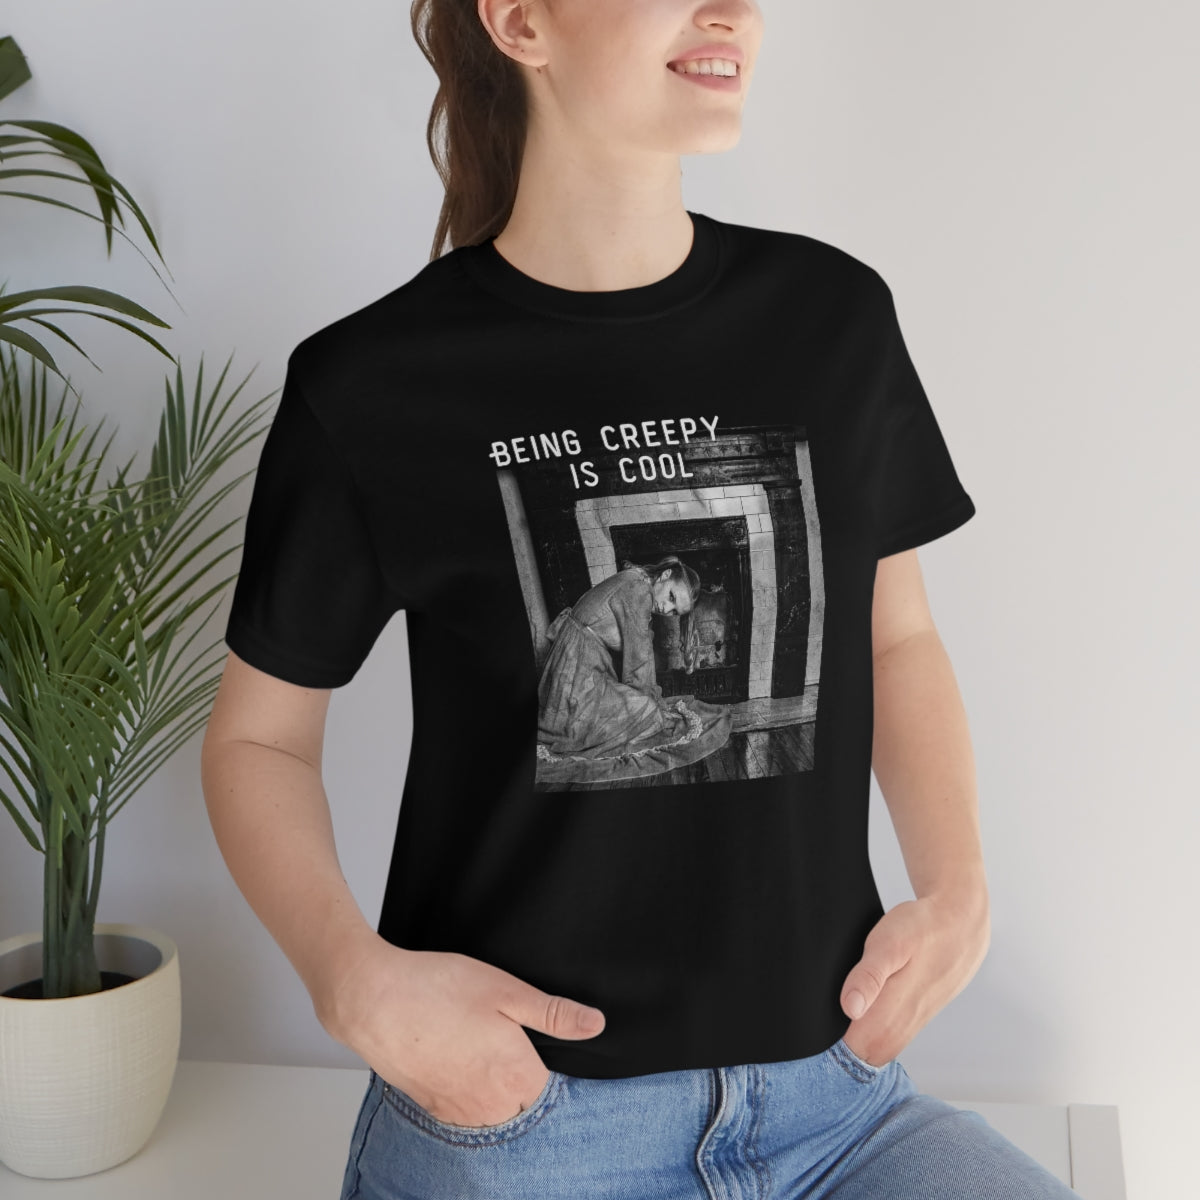 BEING CREEPY IS COOL - UNISEX FIT